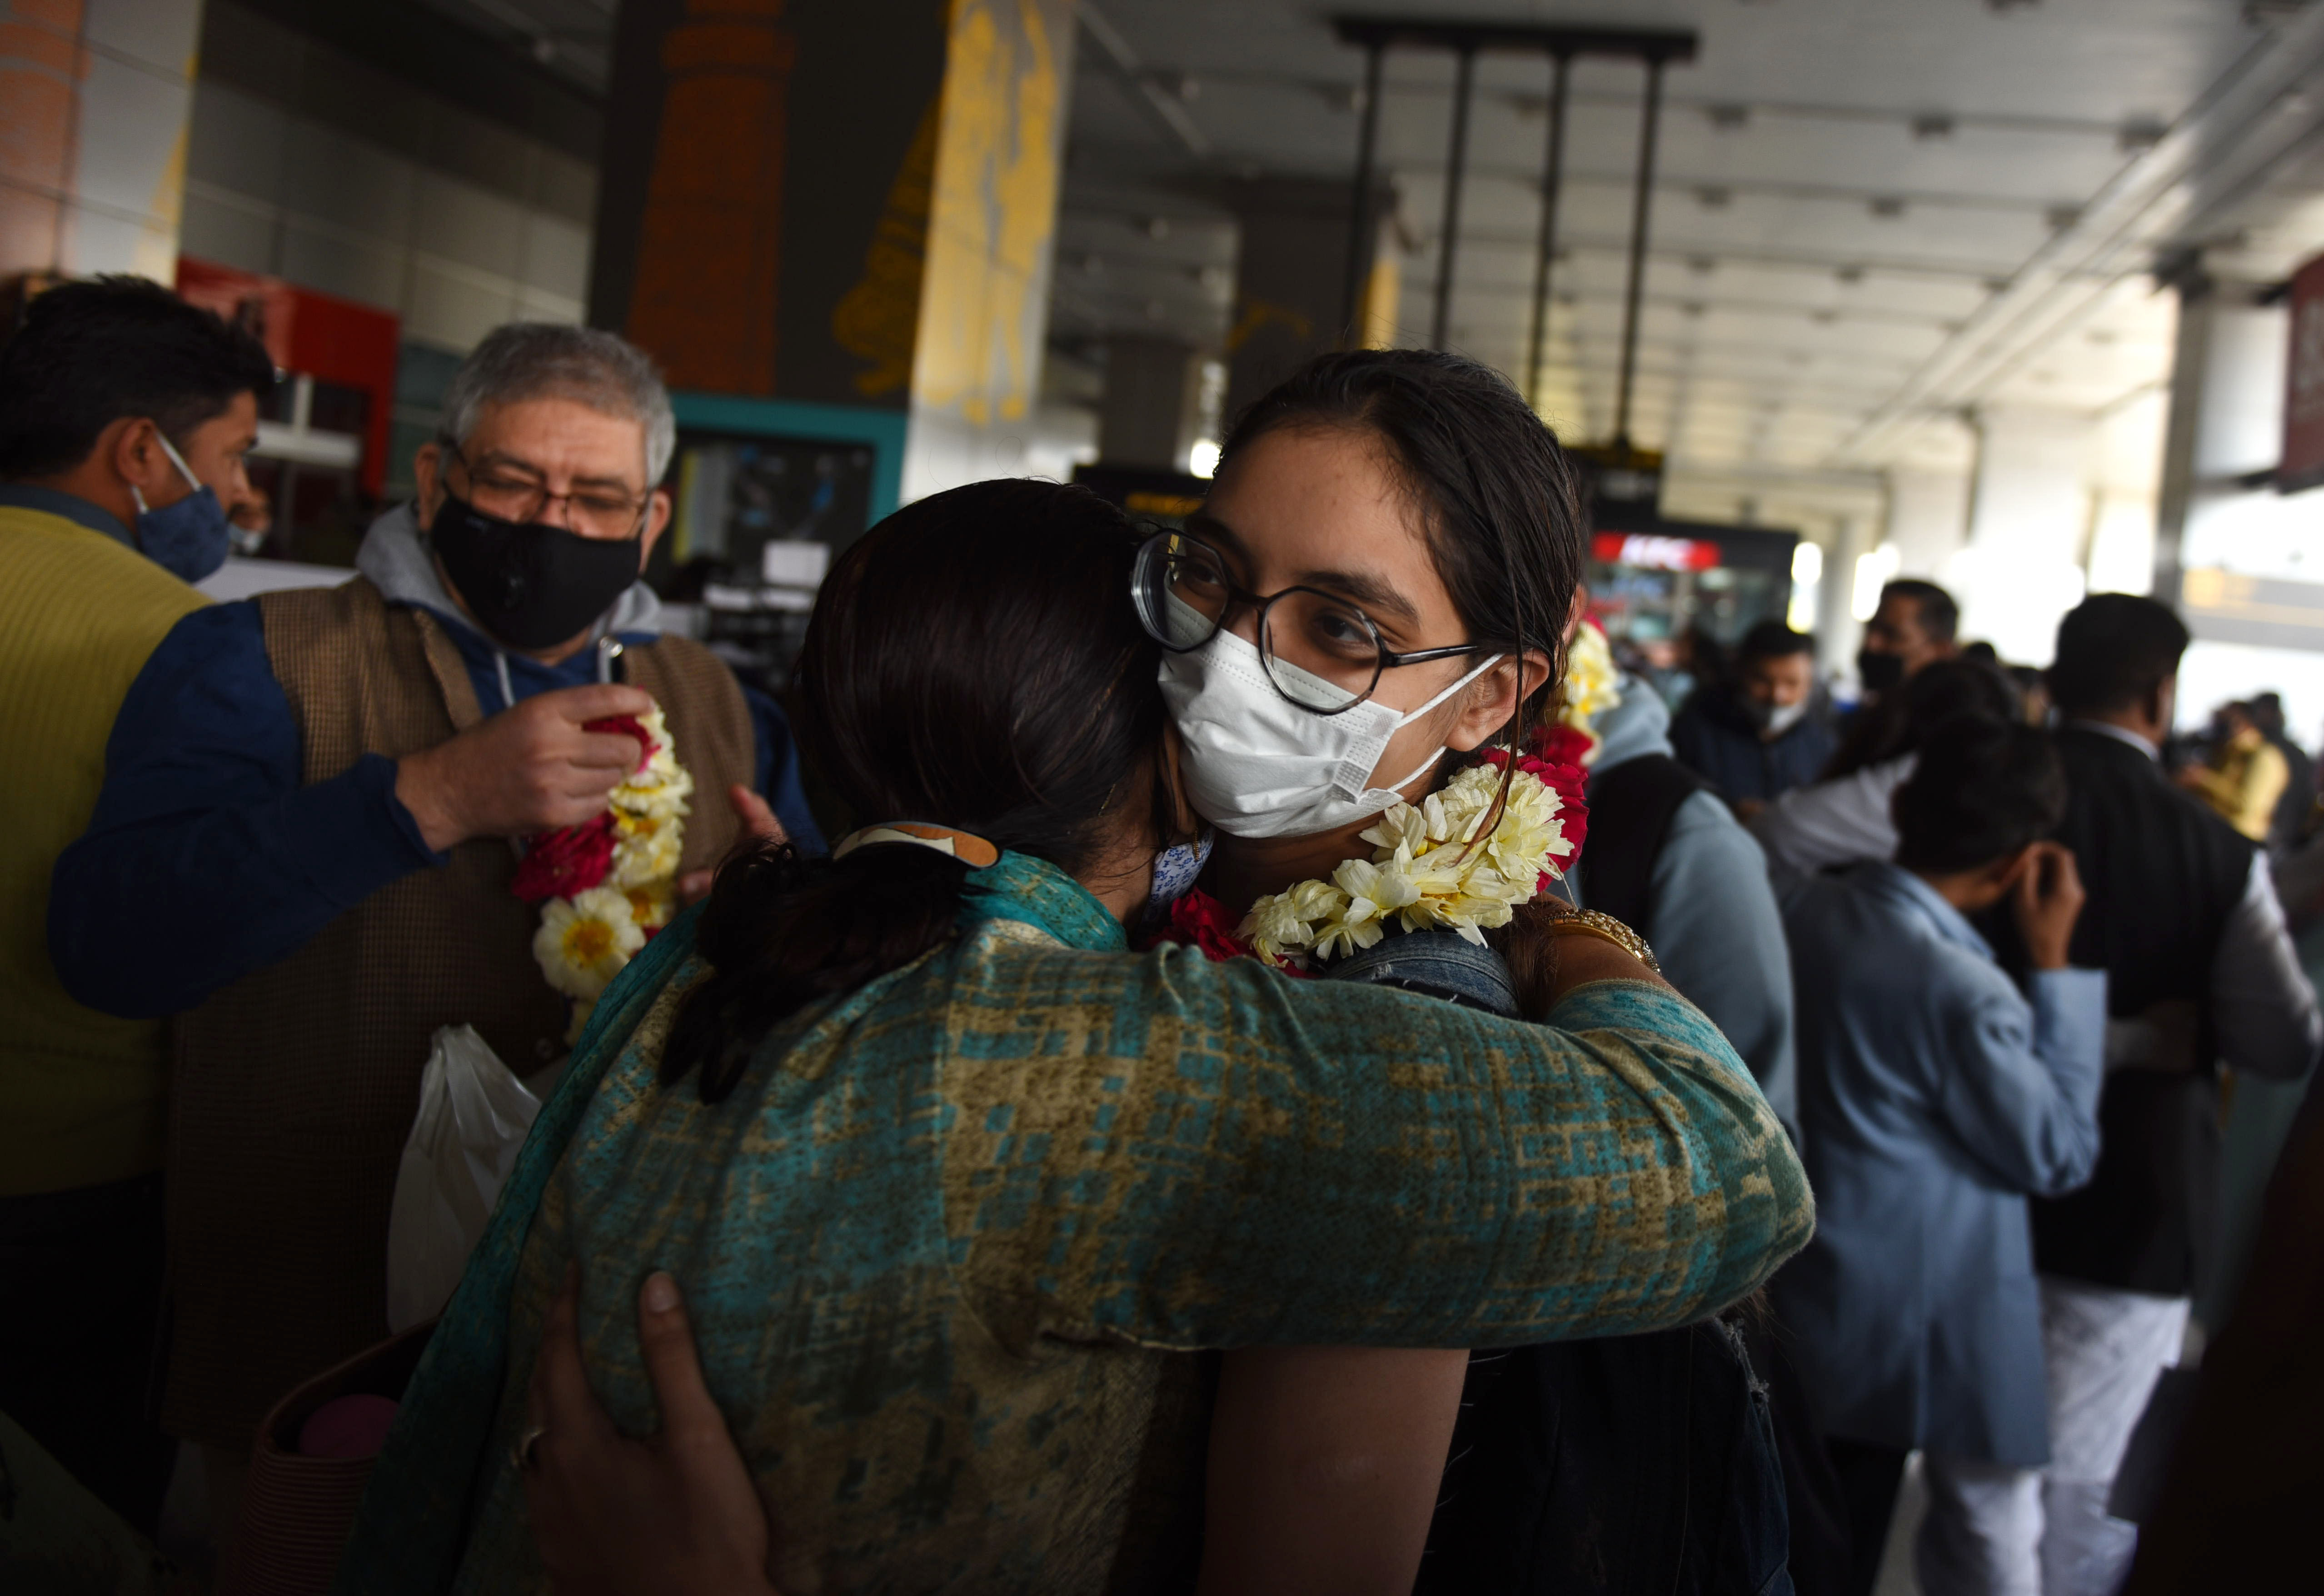 Female student hugging another female in a travel area after successfully returning to India from Ukraine